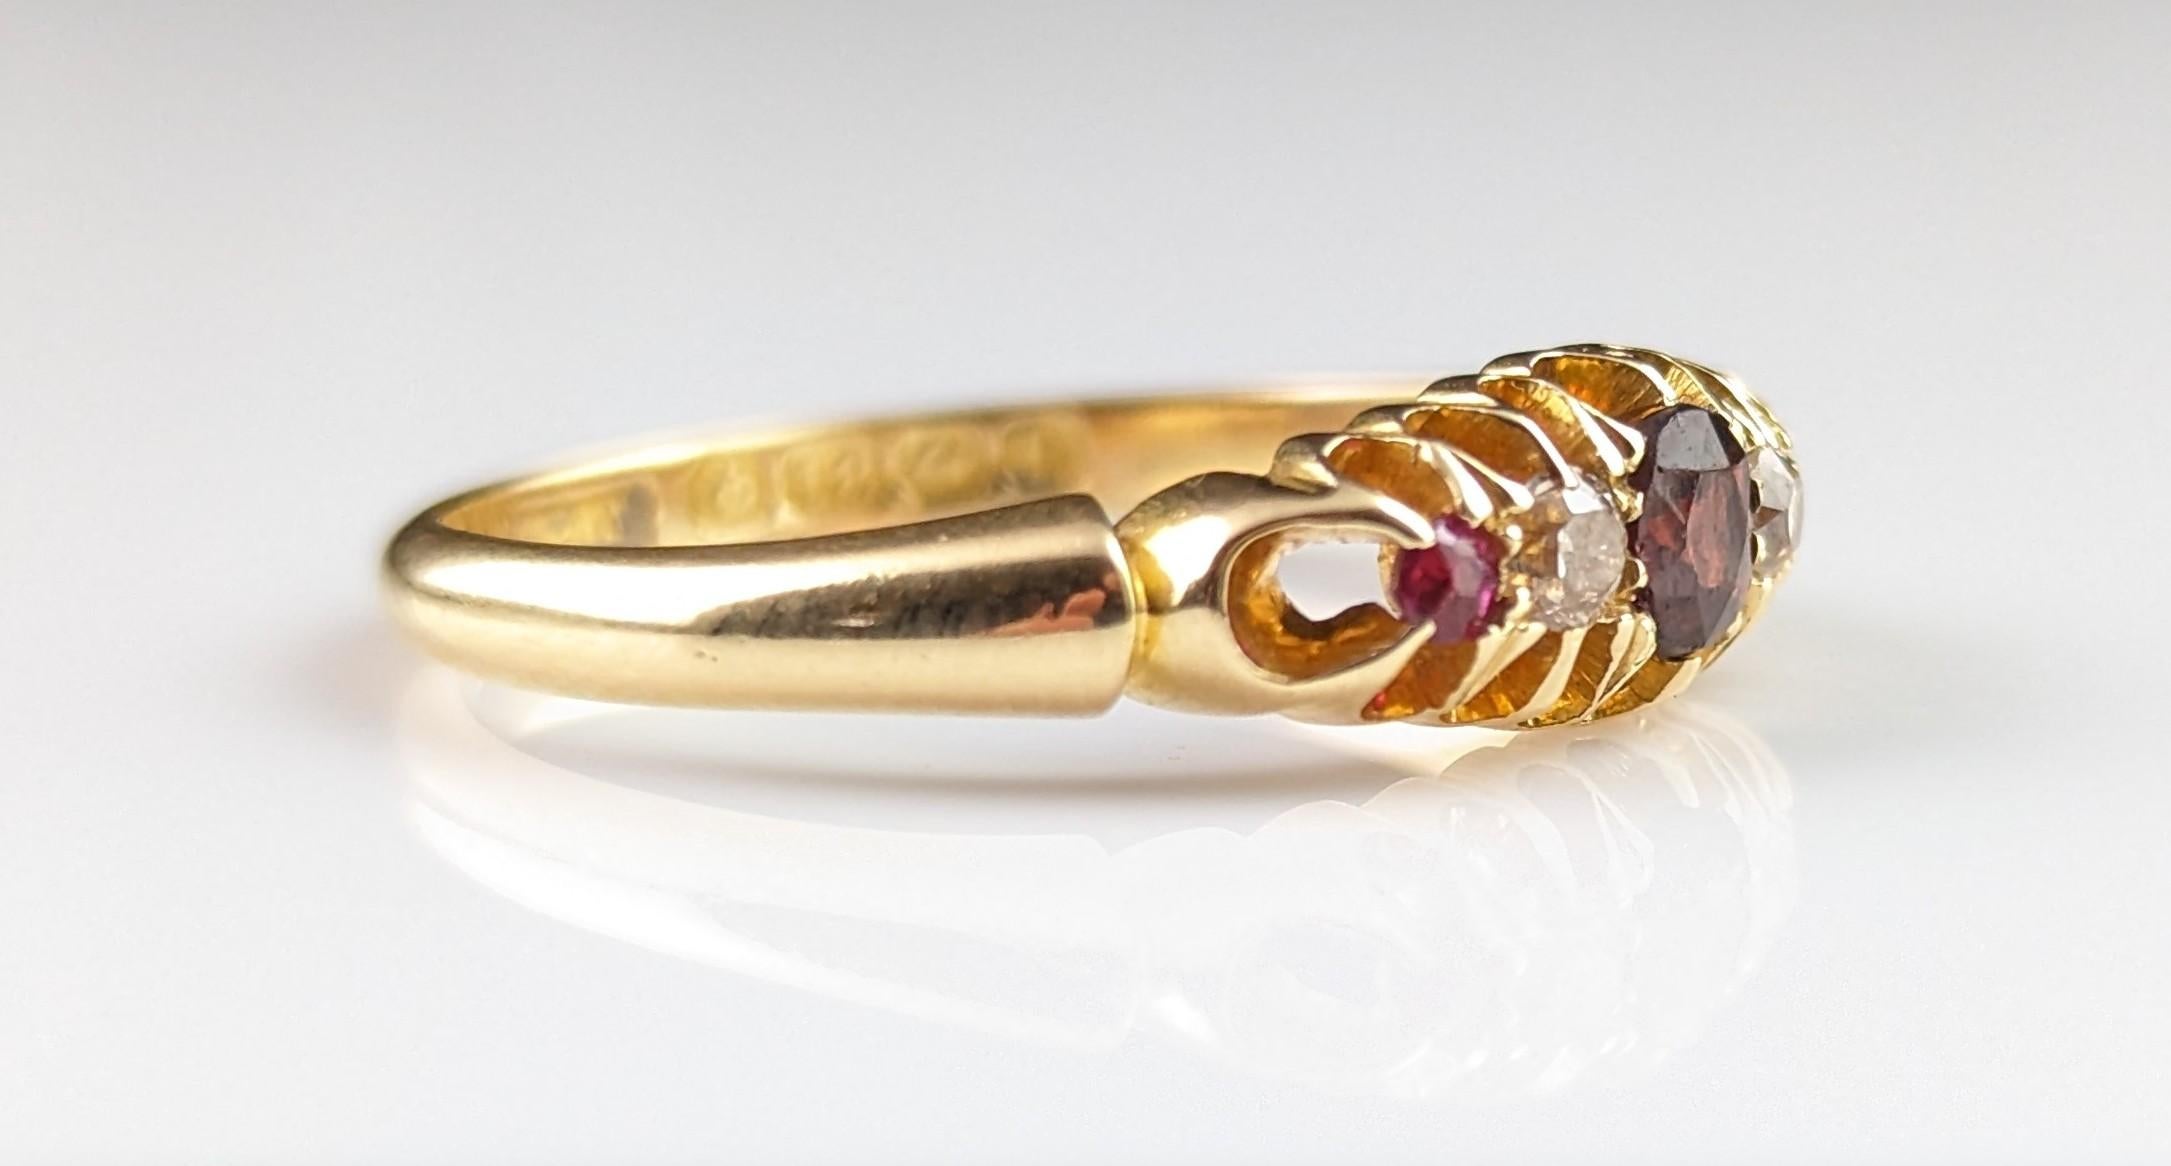 Antique Garnet, Ruby and Diamond Ring, 18ct Gold 13